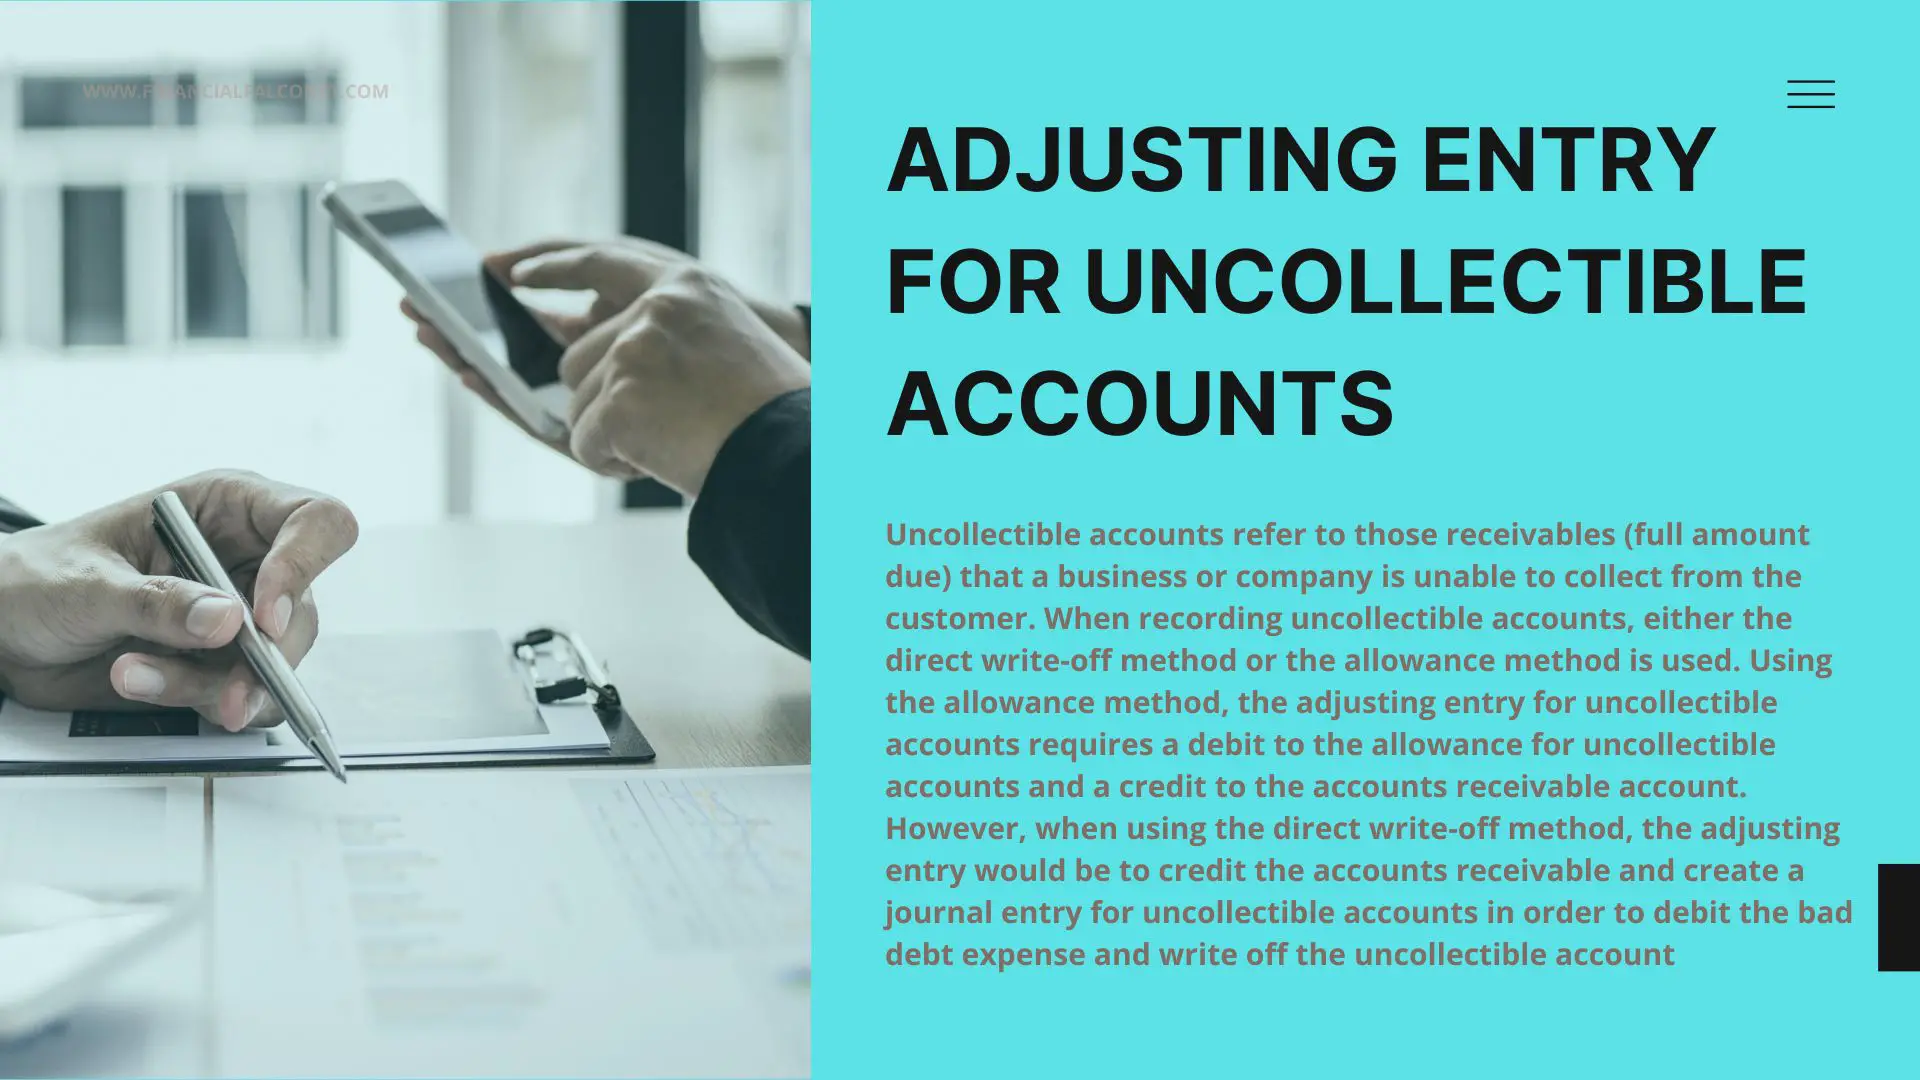 Adjusting entry for uncollectible accounts